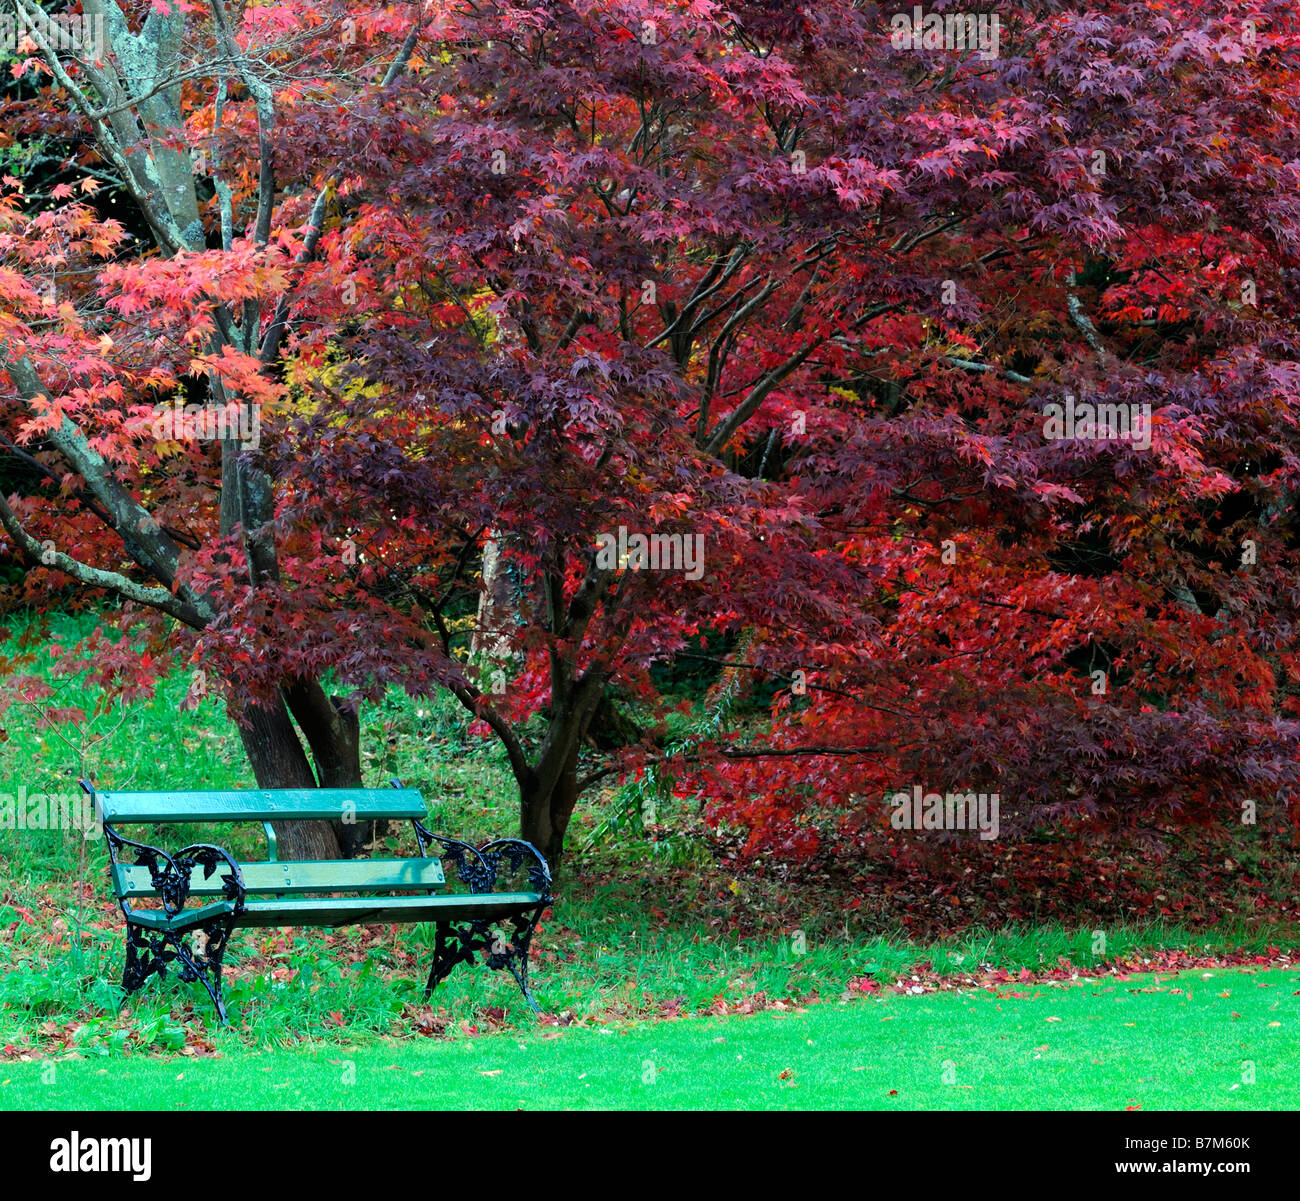 red vibrant coloured acer palmatum tree autumn autumnal color colour fall small green garden seat bench under underneath Stock Photo